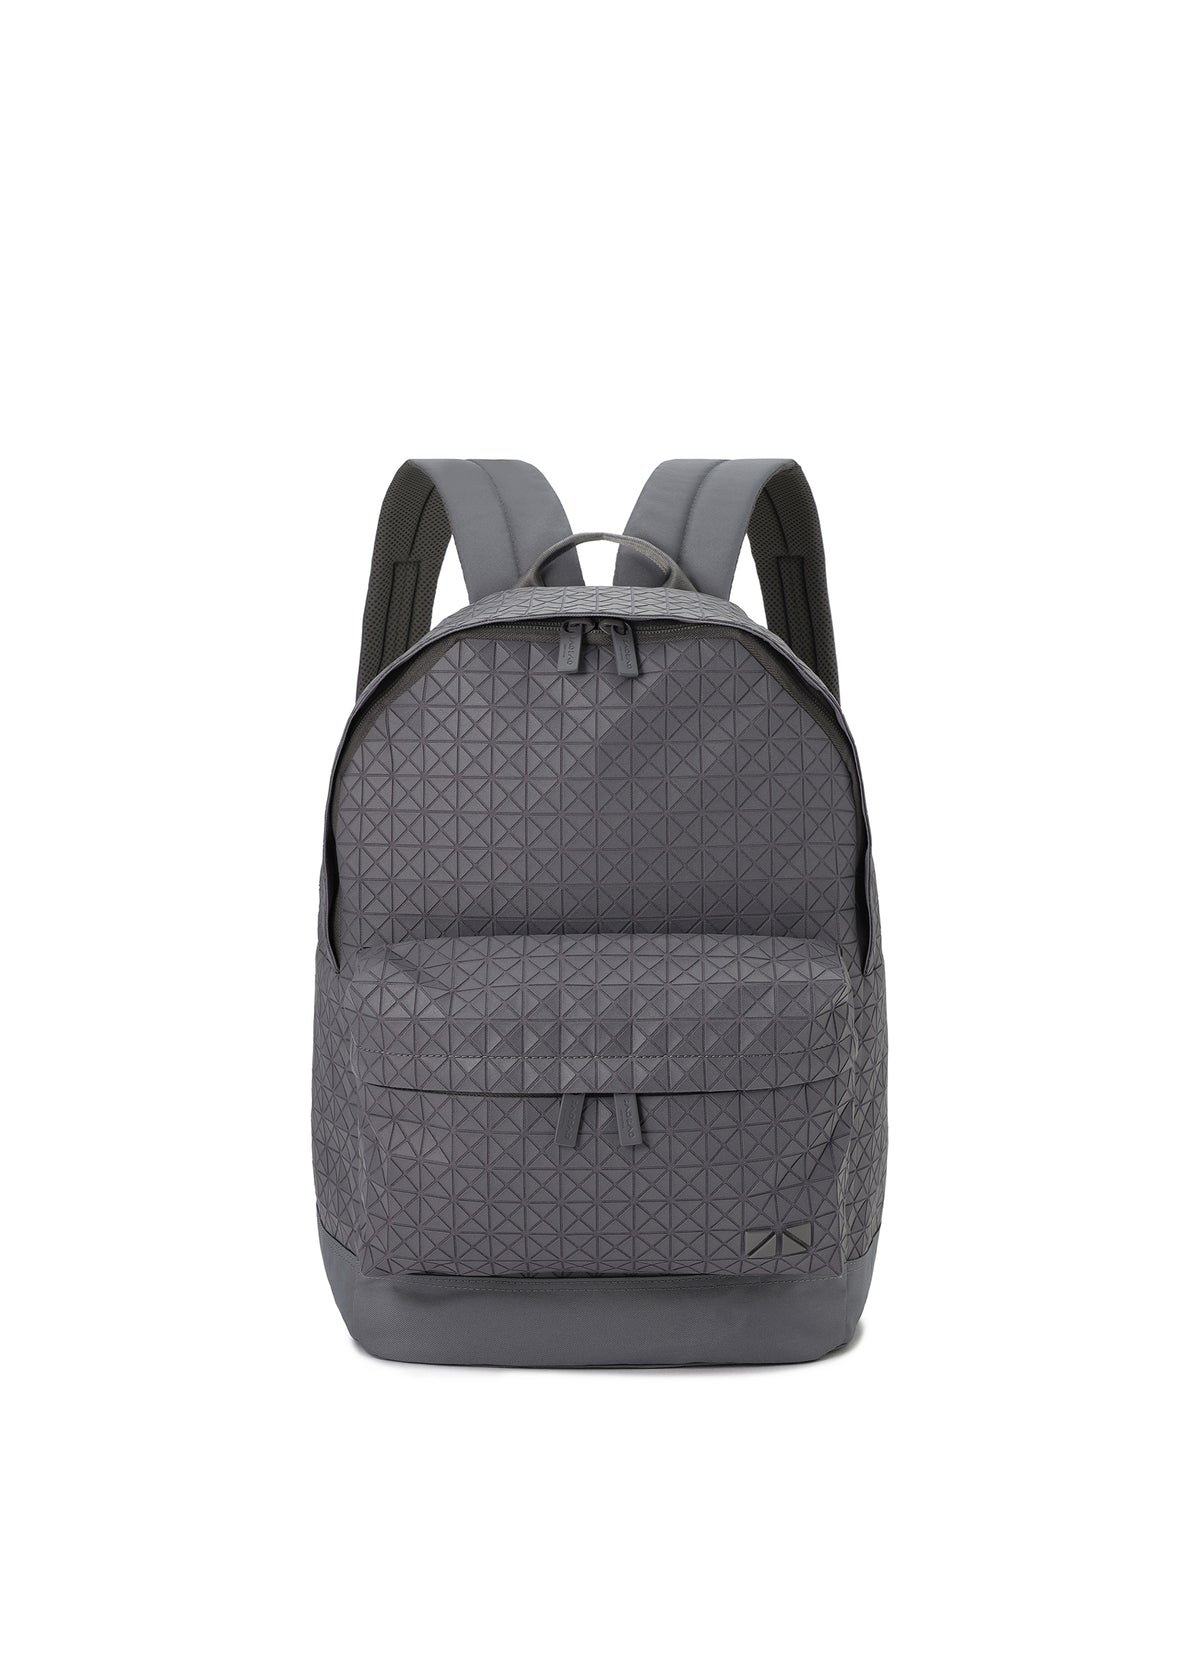 DAYPACK ONE-TONE、バッグ&財布_バックパック、グレー